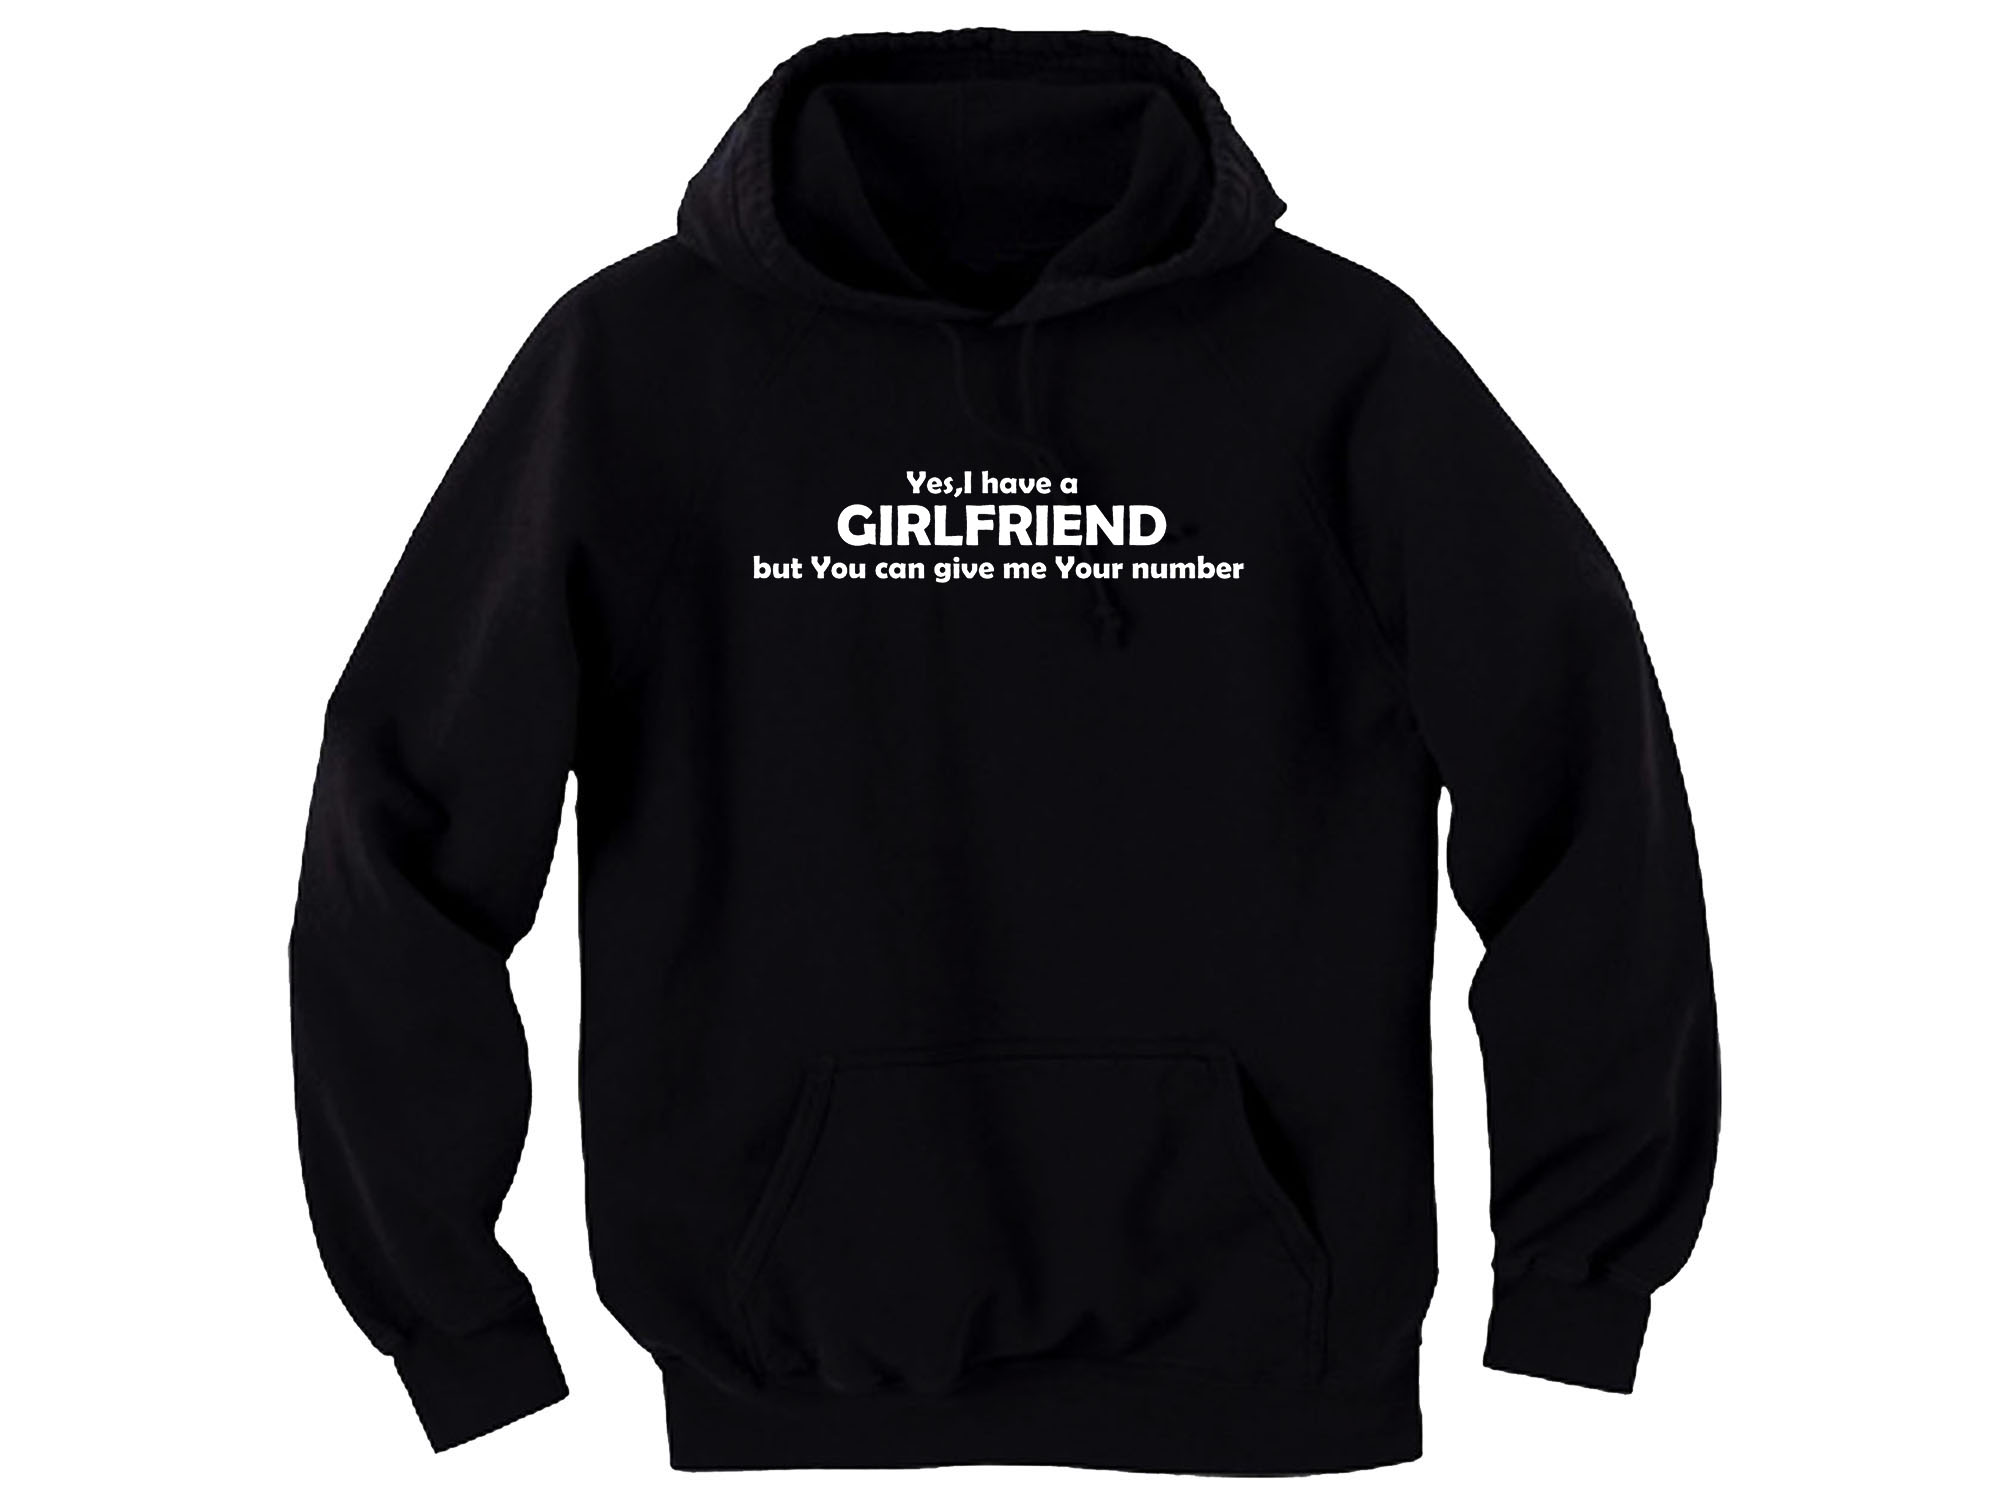 Yes,I have a girlfriend but you can give me your number funny hoodie